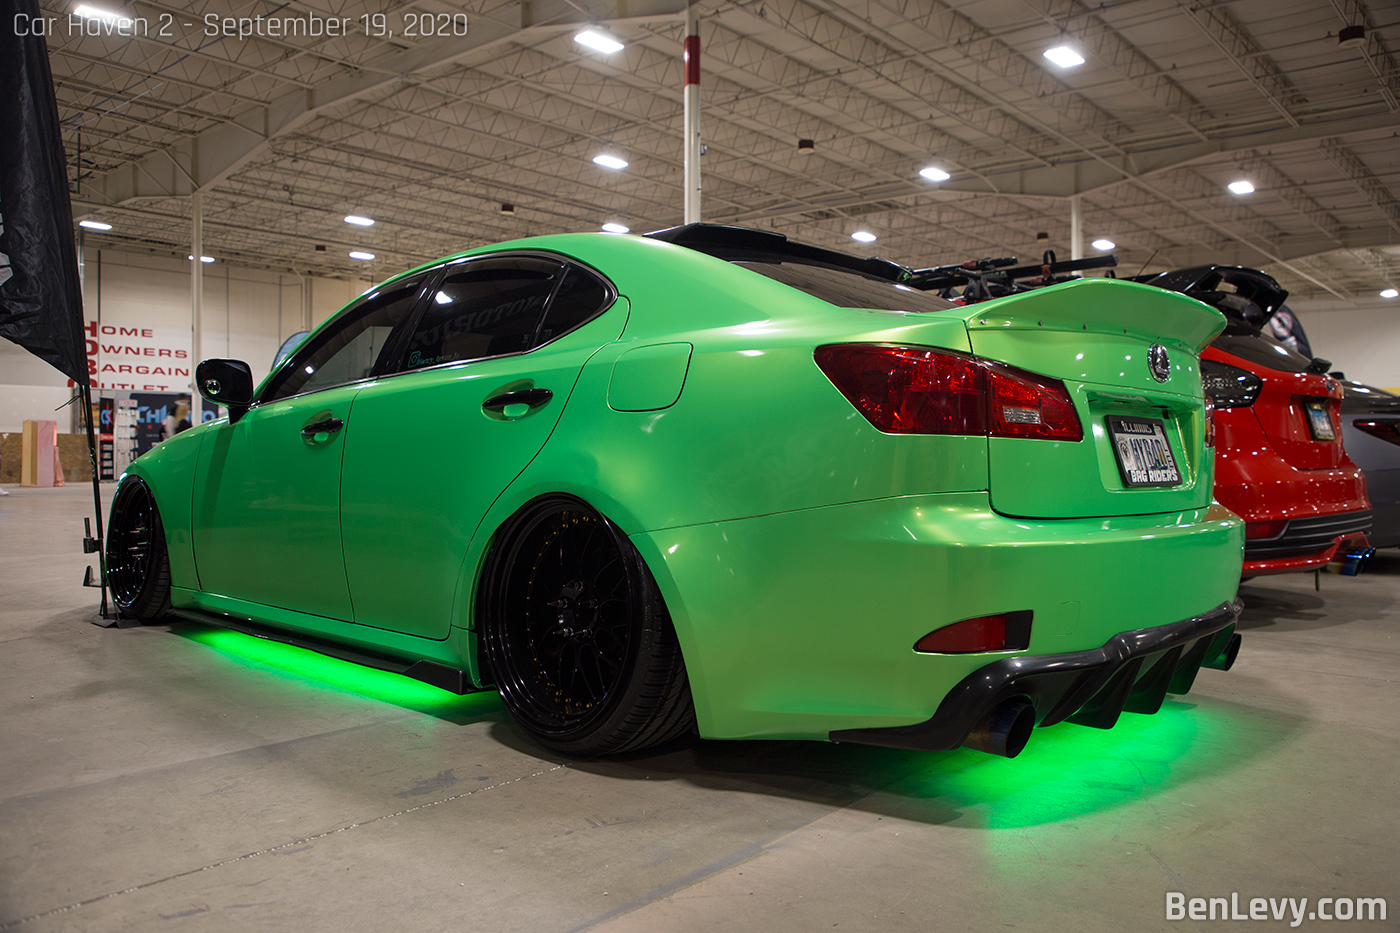 Green Lexus IS 250 at Car Haven 2